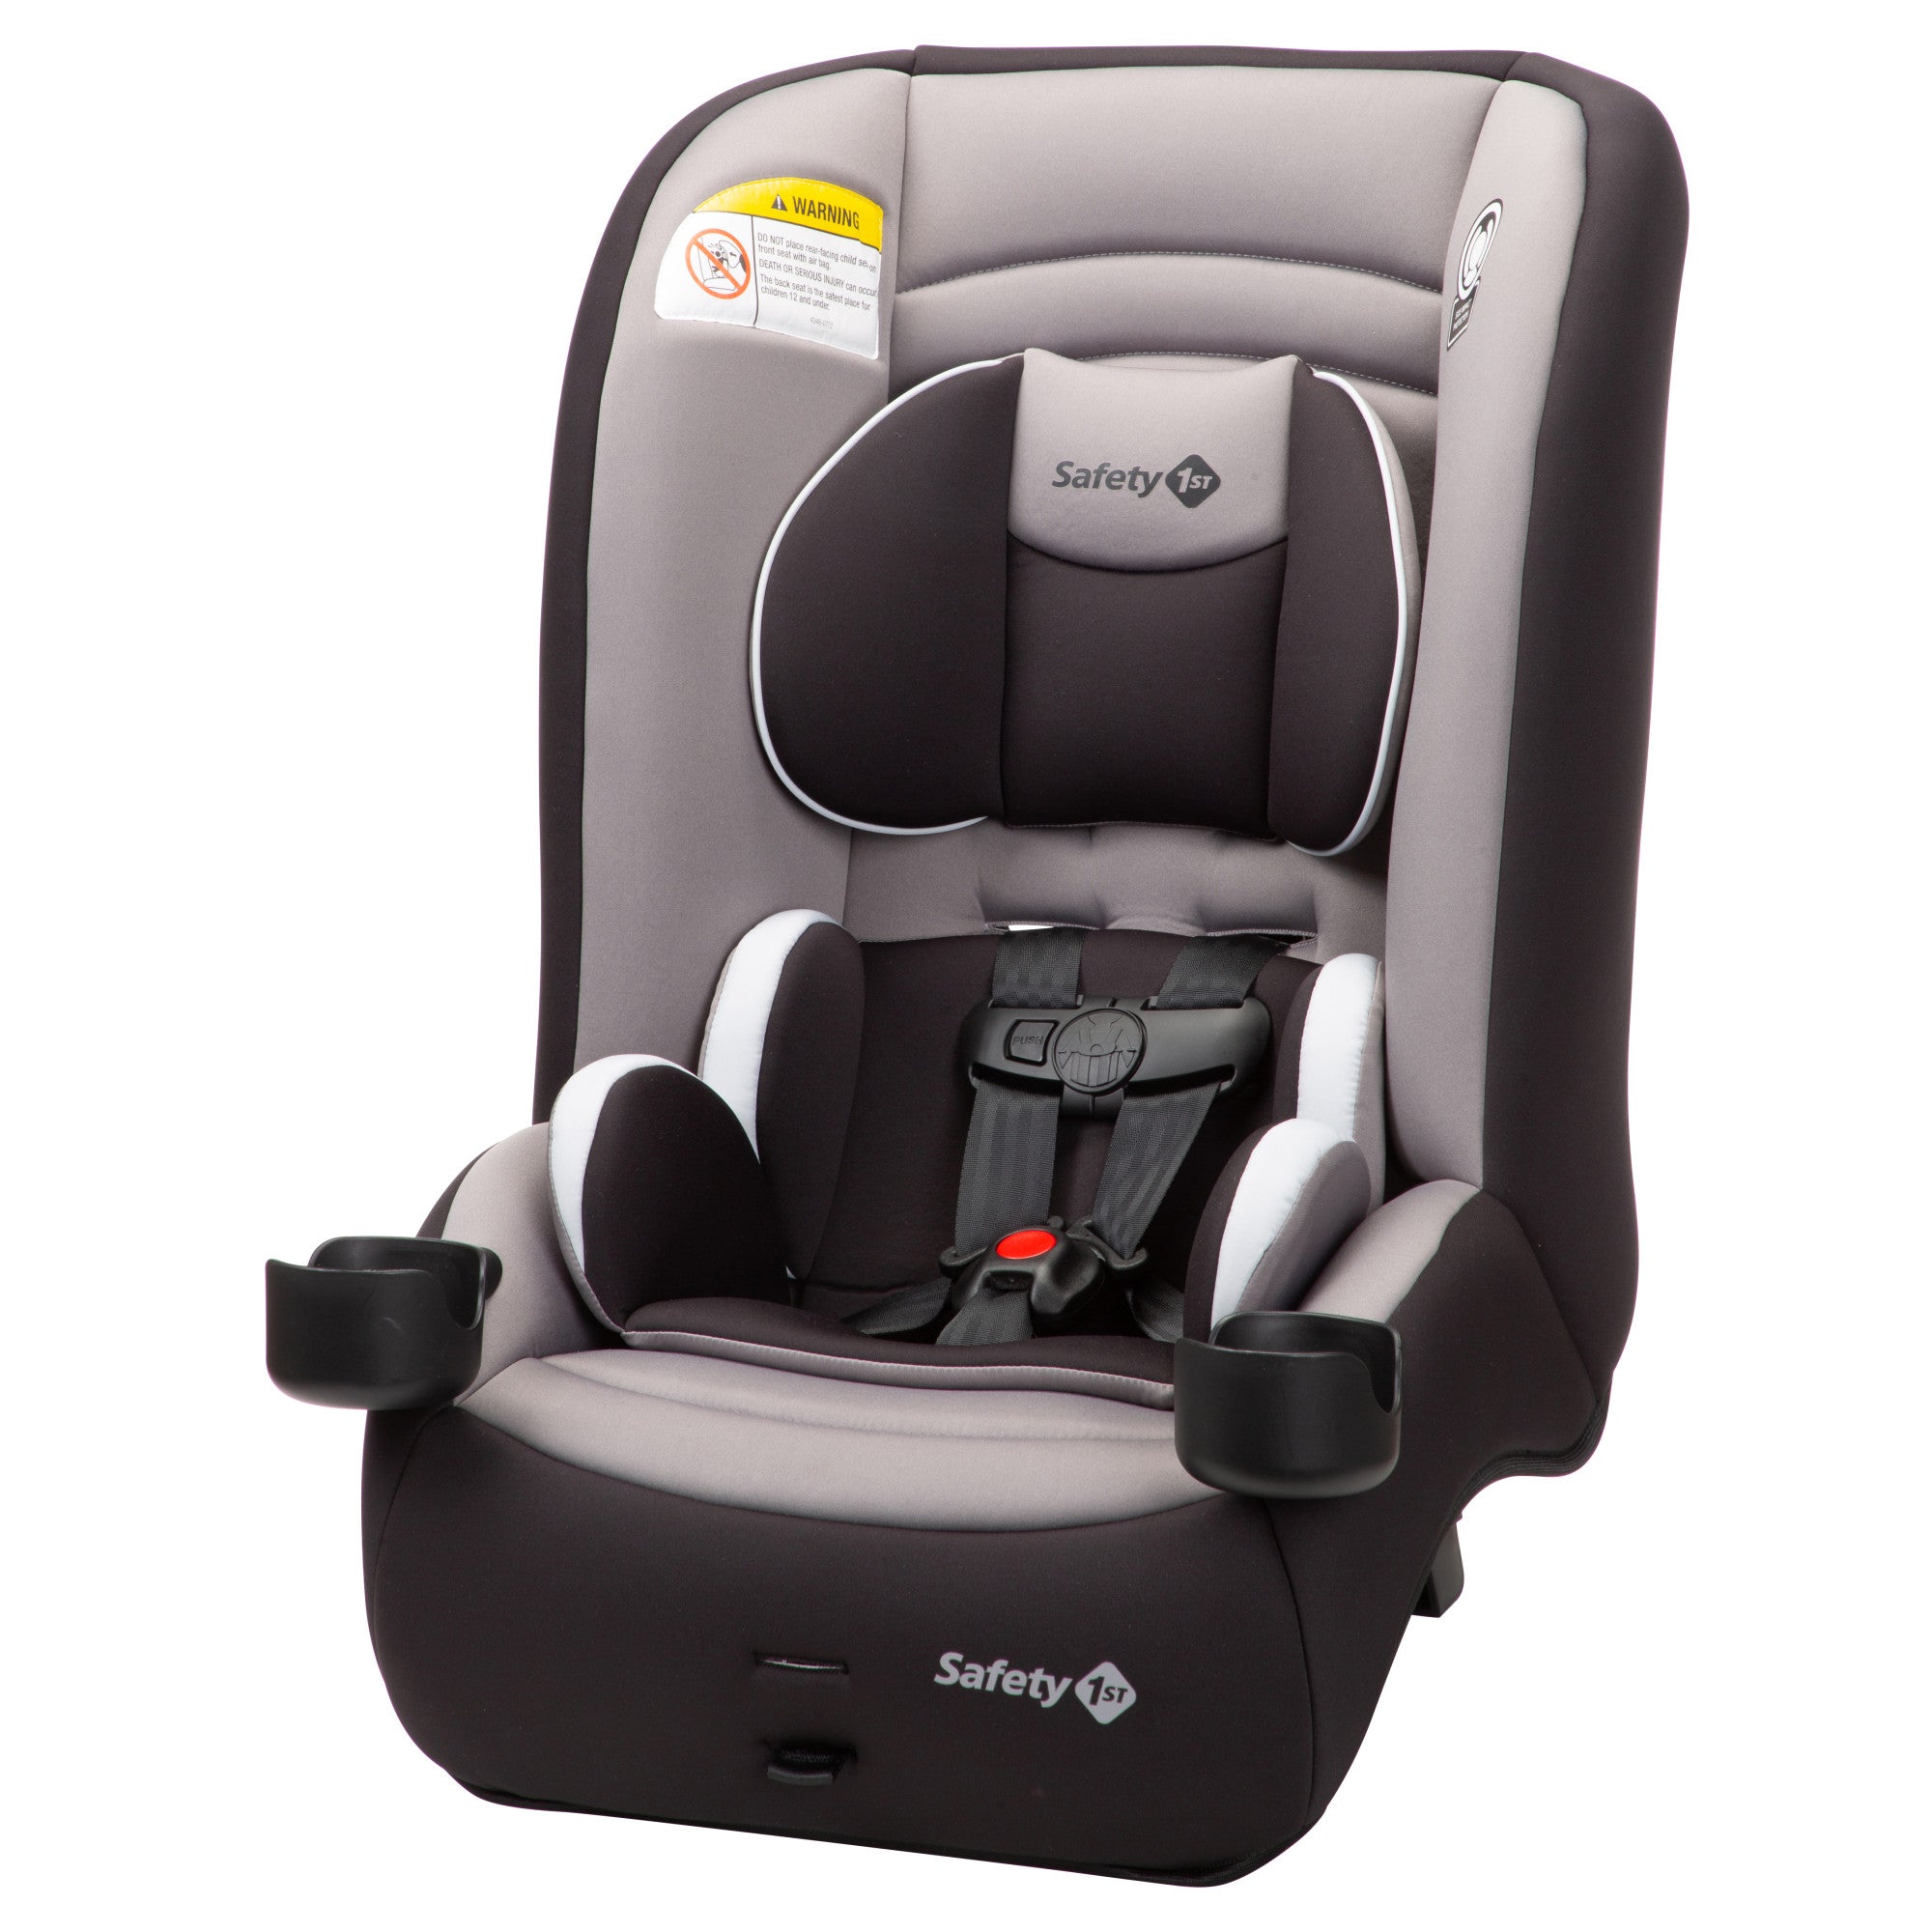 Safety 1st Jive 2-in-1 Convertible Car Seat Black Fox